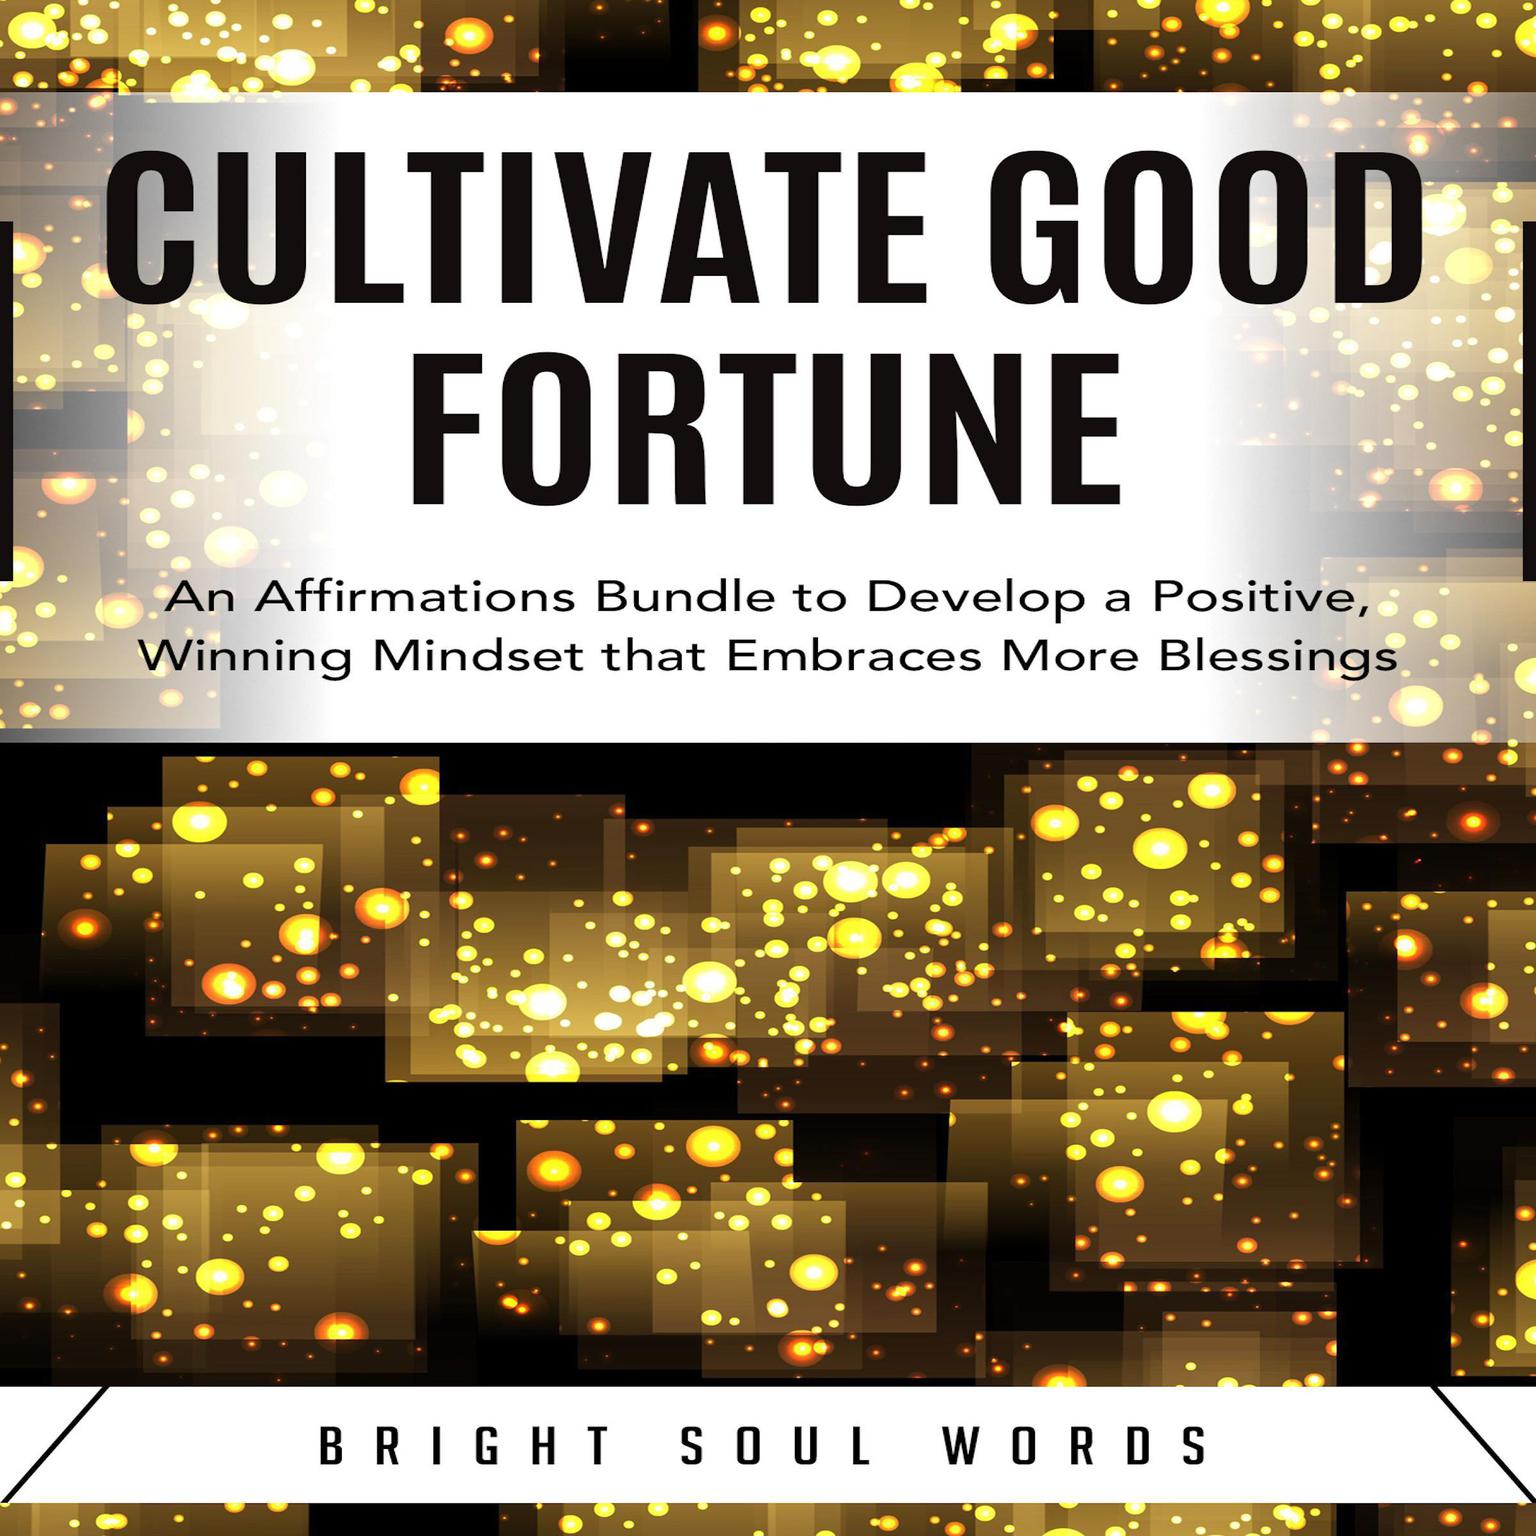 Cultivate Good Fortune: An Affirmations Bundle to Develop a Positive, Winning Mindset that Embraces More Blessings Audiobook, by Bright Soul Words